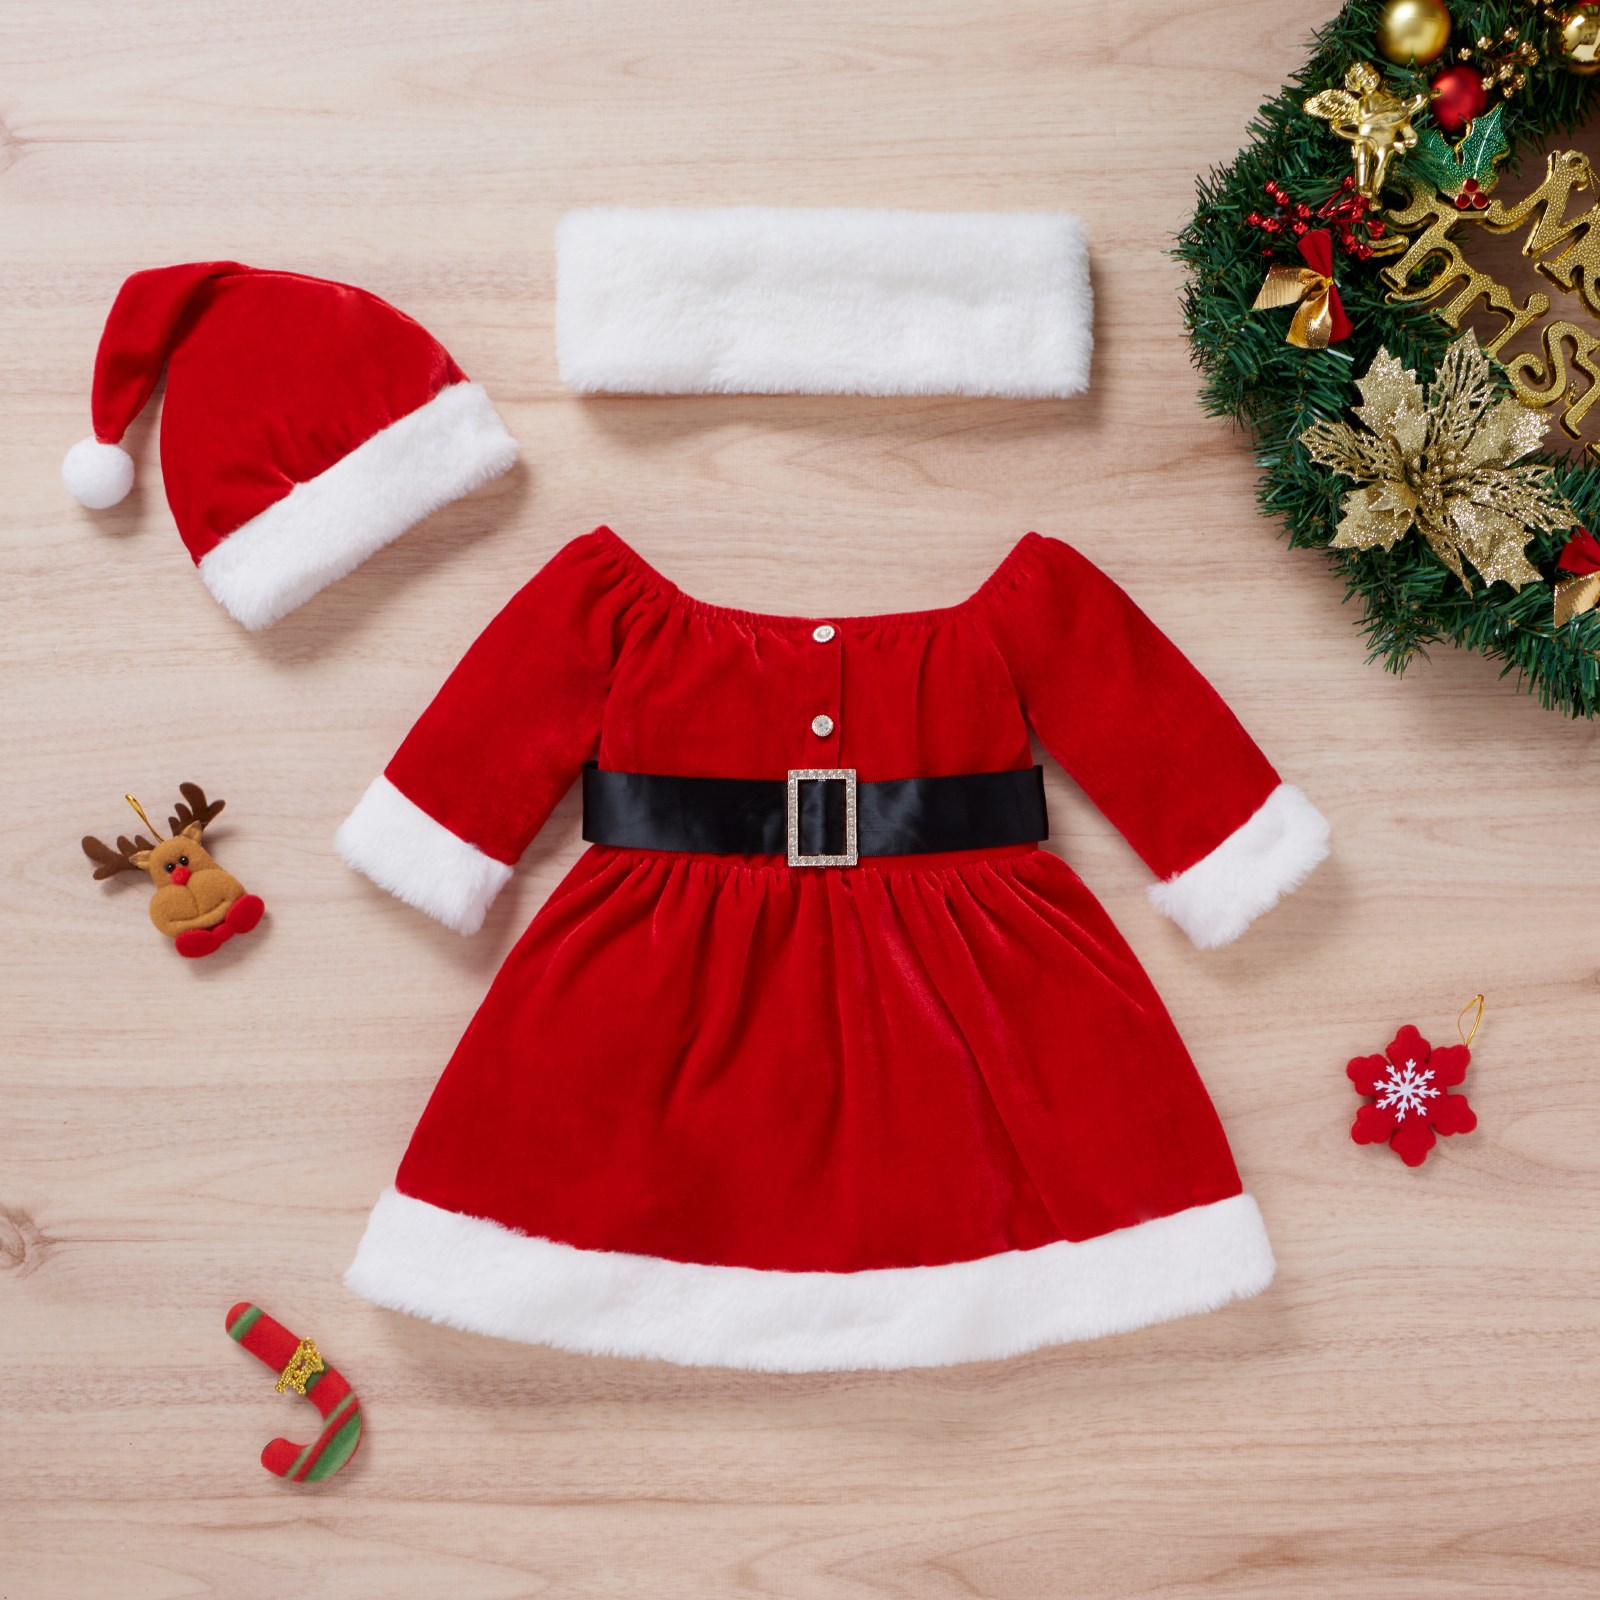 Adorable Toddler Christmas Dress with Hat & Scarf – festive charm for your little one! Available now. image 2